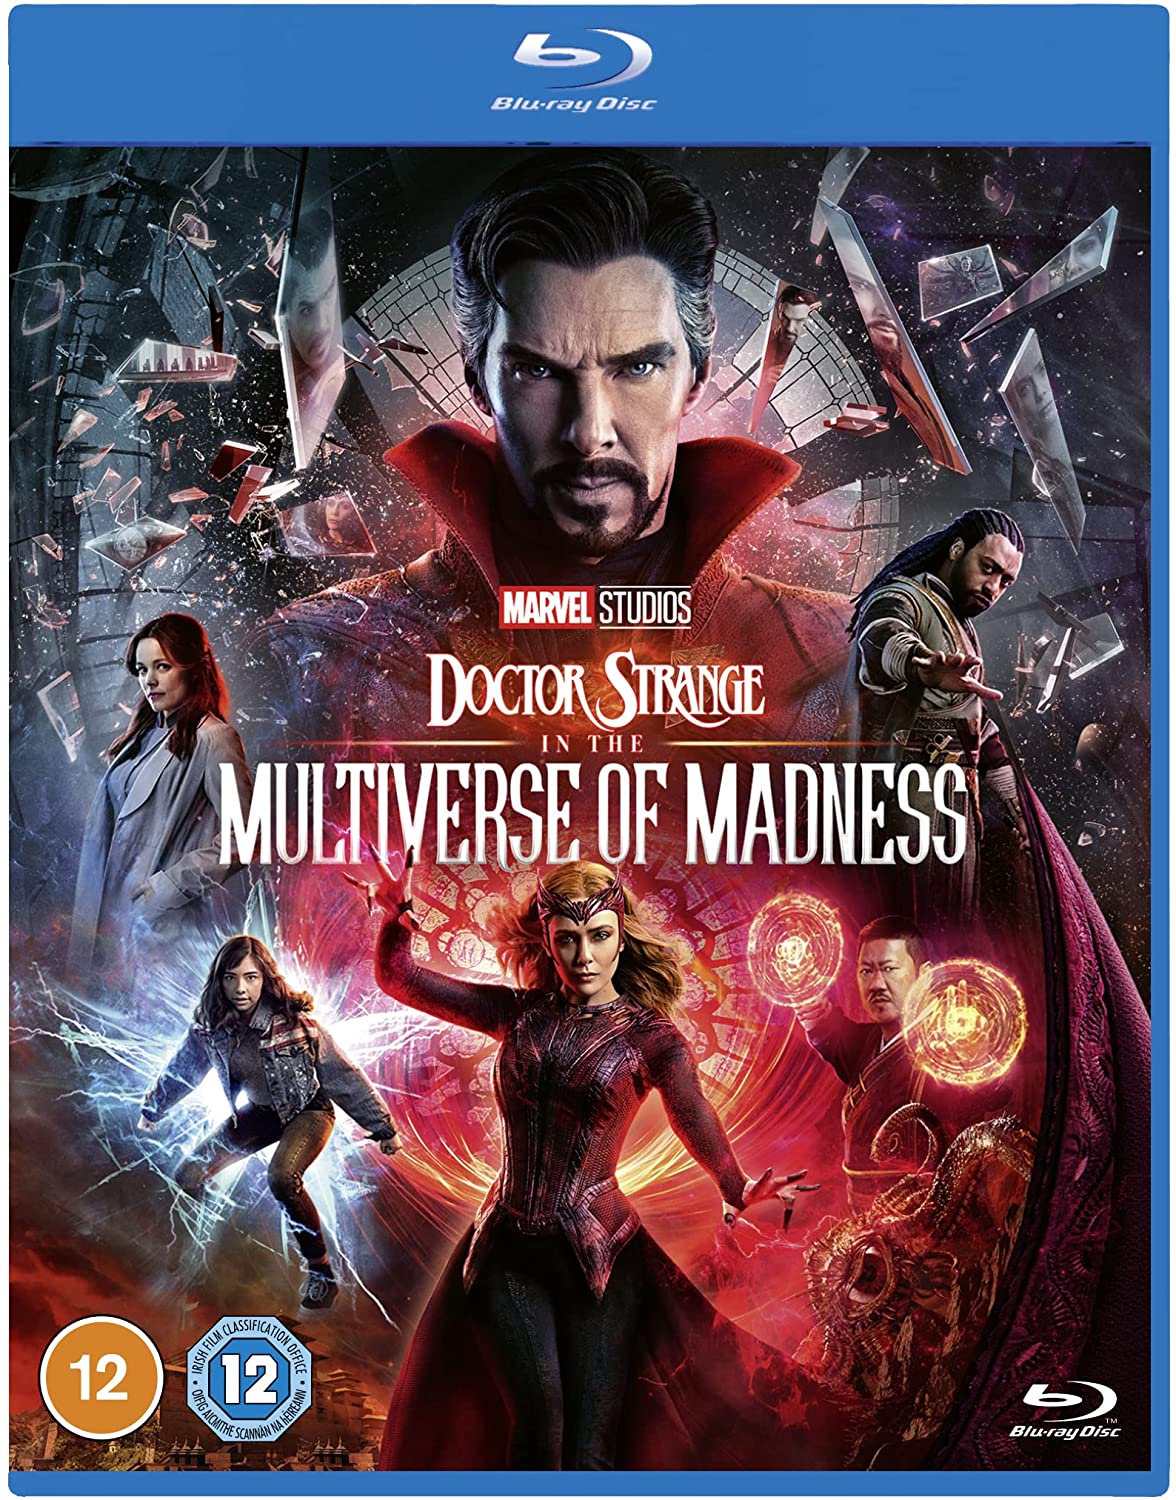 Doctor Strange in the Multiverse of Madness (2022) BD50